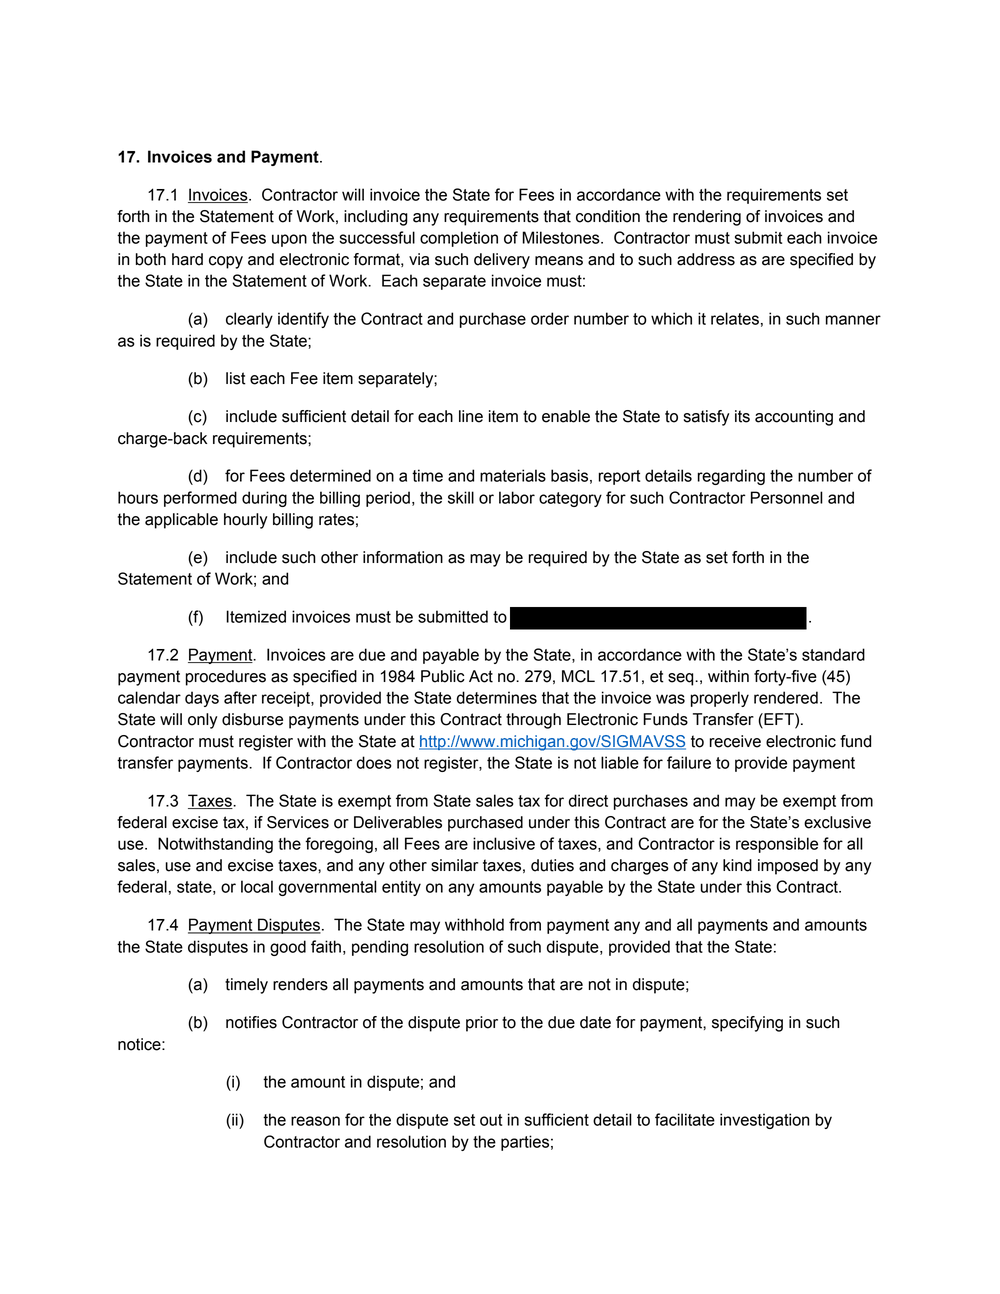 Page 20 from State of Michigan 2020 Kaseware contract